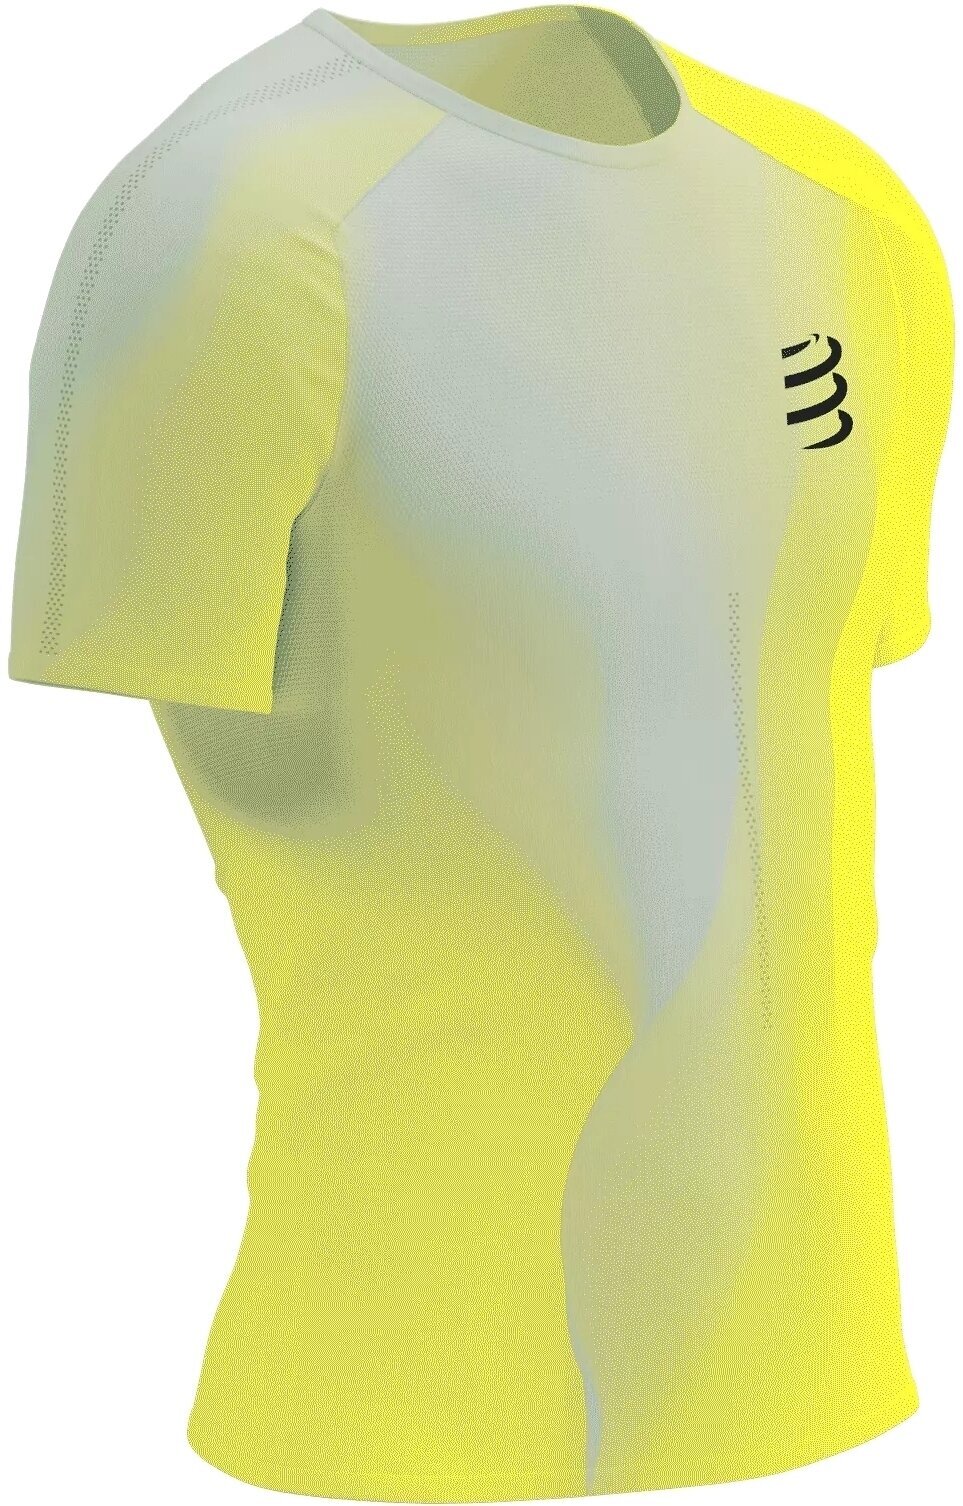 Running t-shirt with short sleeves
 Compressport Performance SS Tshirt M Safety Yellow/White/Black L Running t-shirt with short sleeves